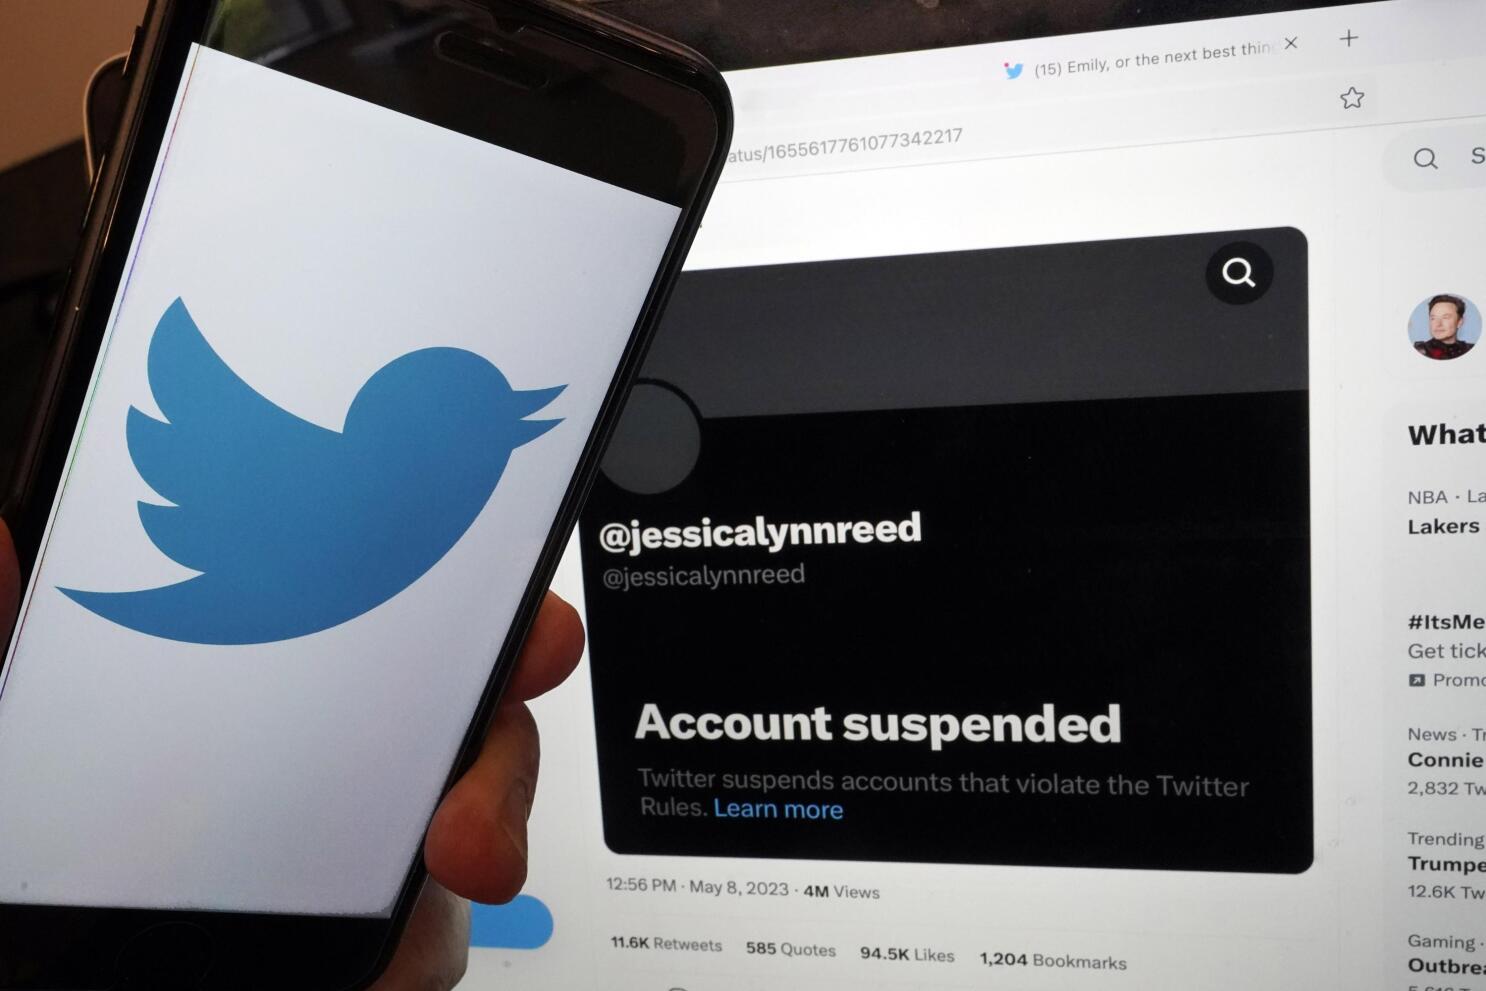 Twitter is purging inactive accounts including people who have